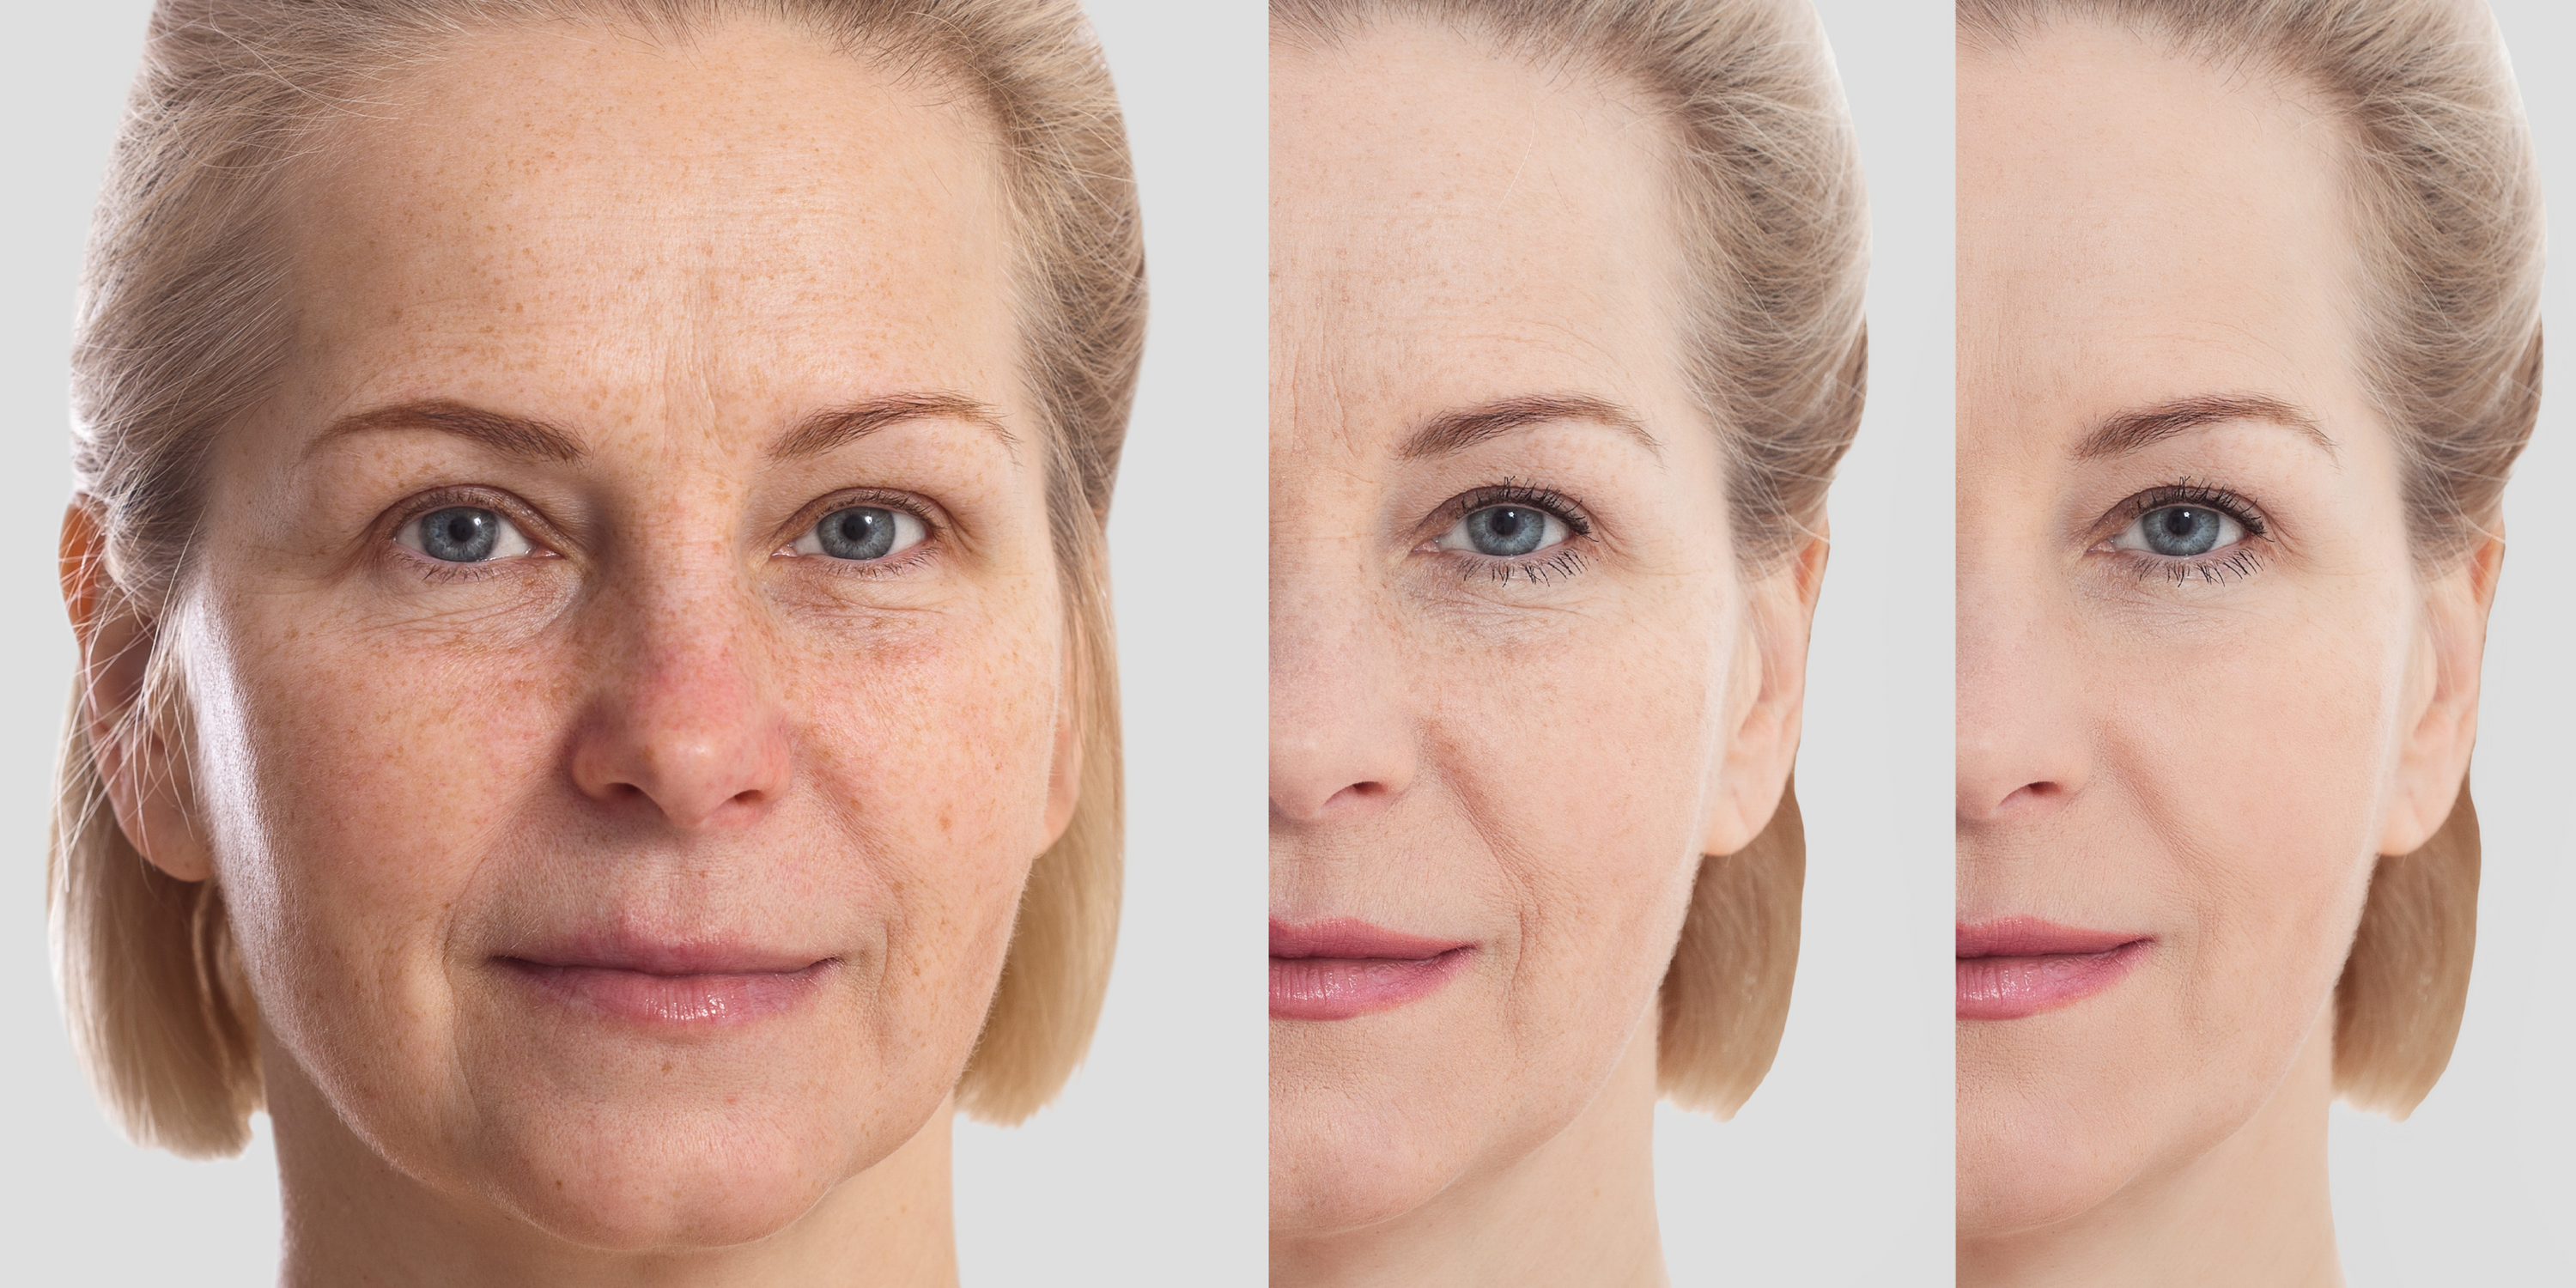 How Skinceuticals Anti-Ageing Skincare Products Can Help You Look Younger